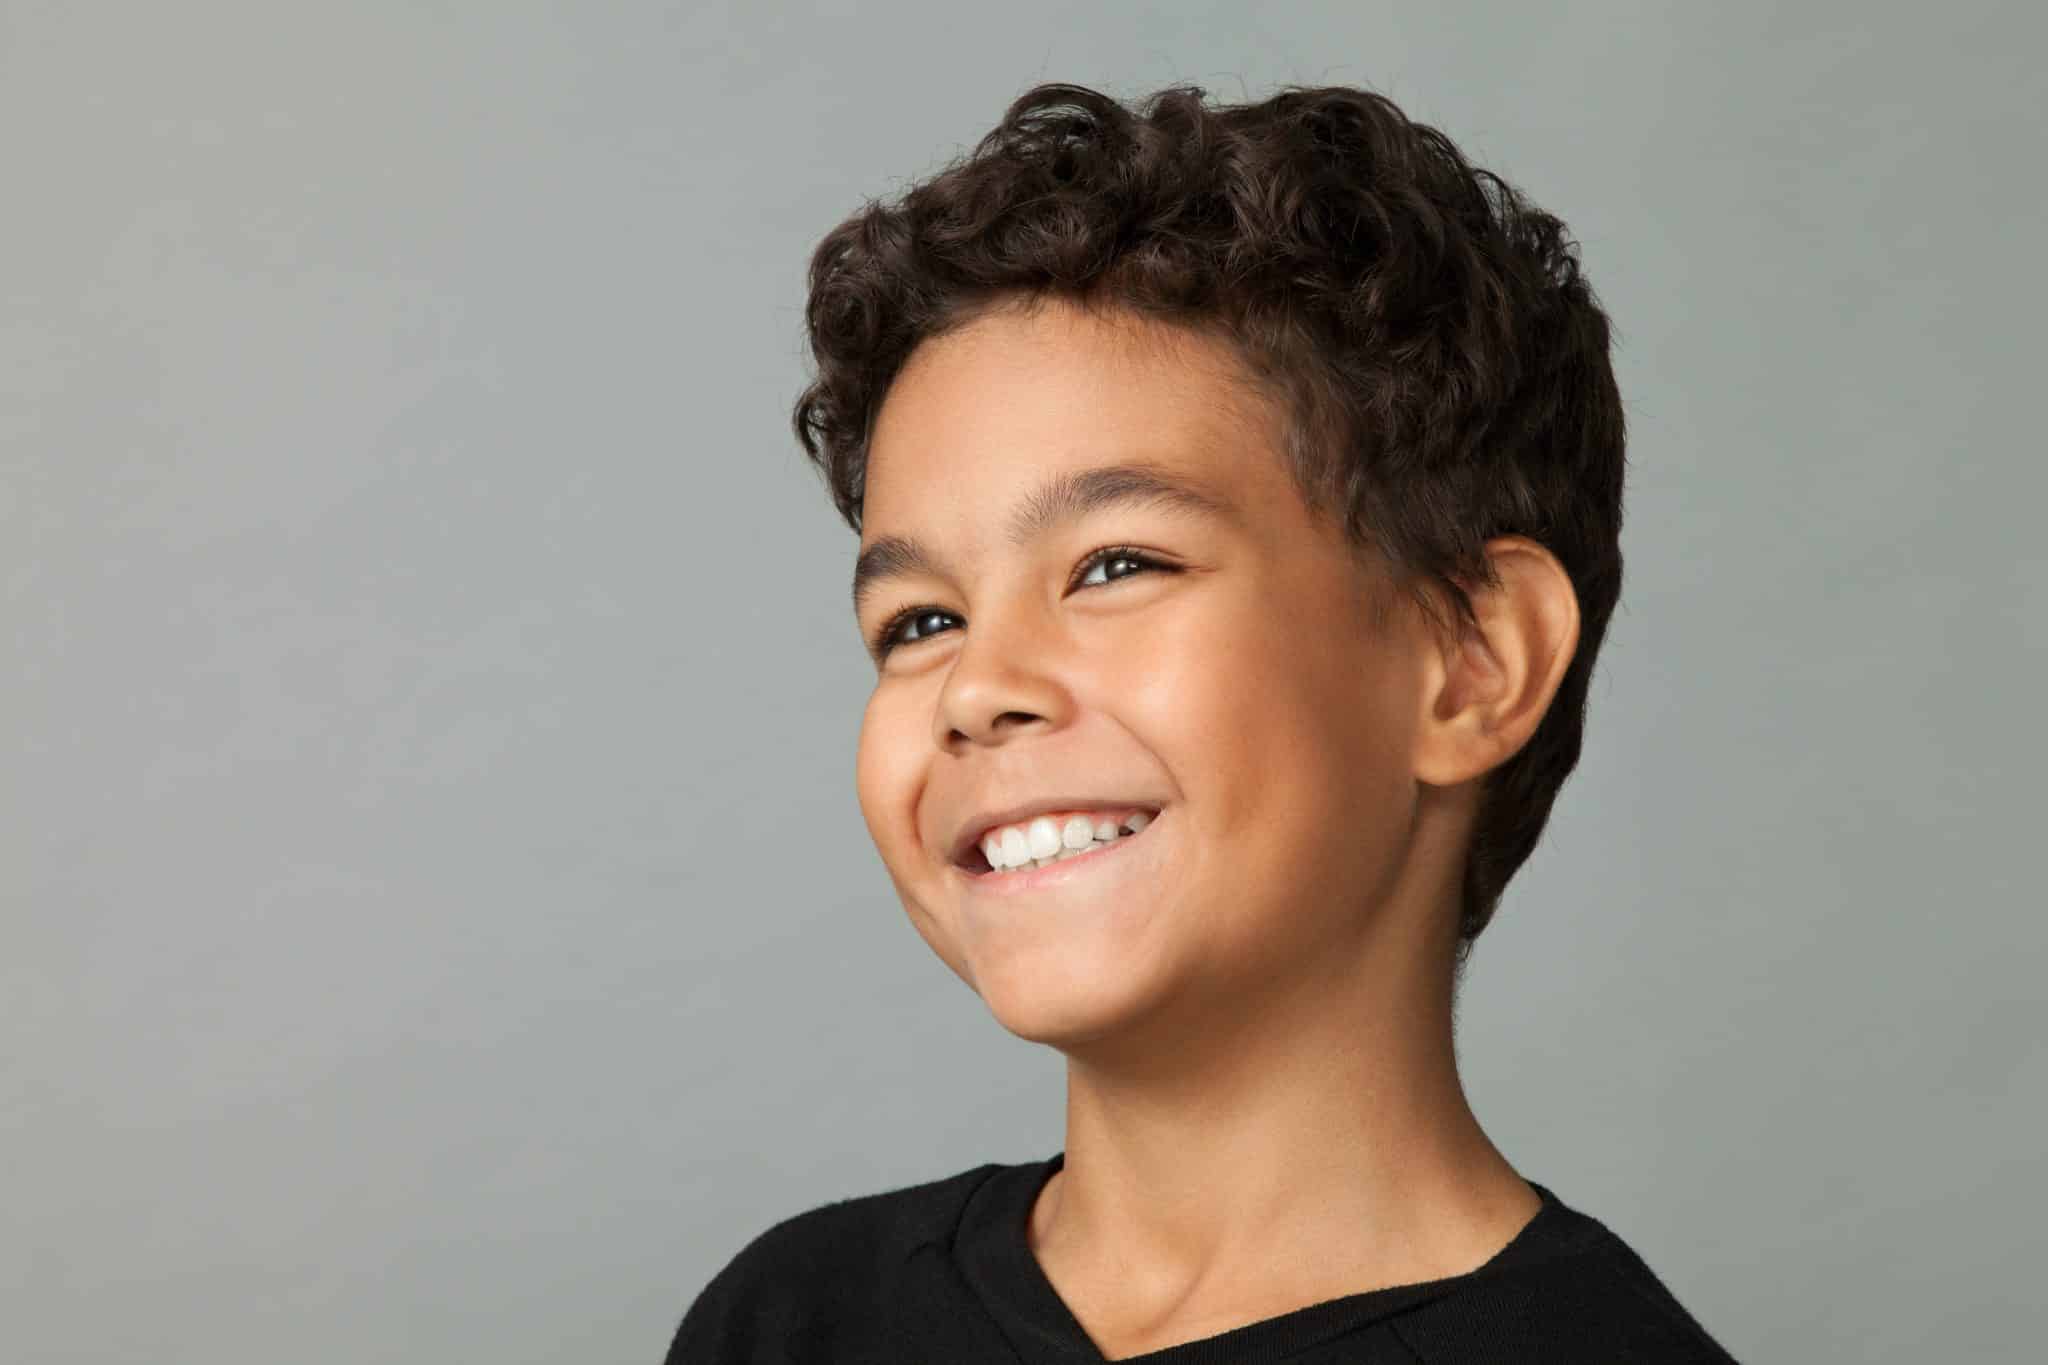 Young boy in black shirt smiling.